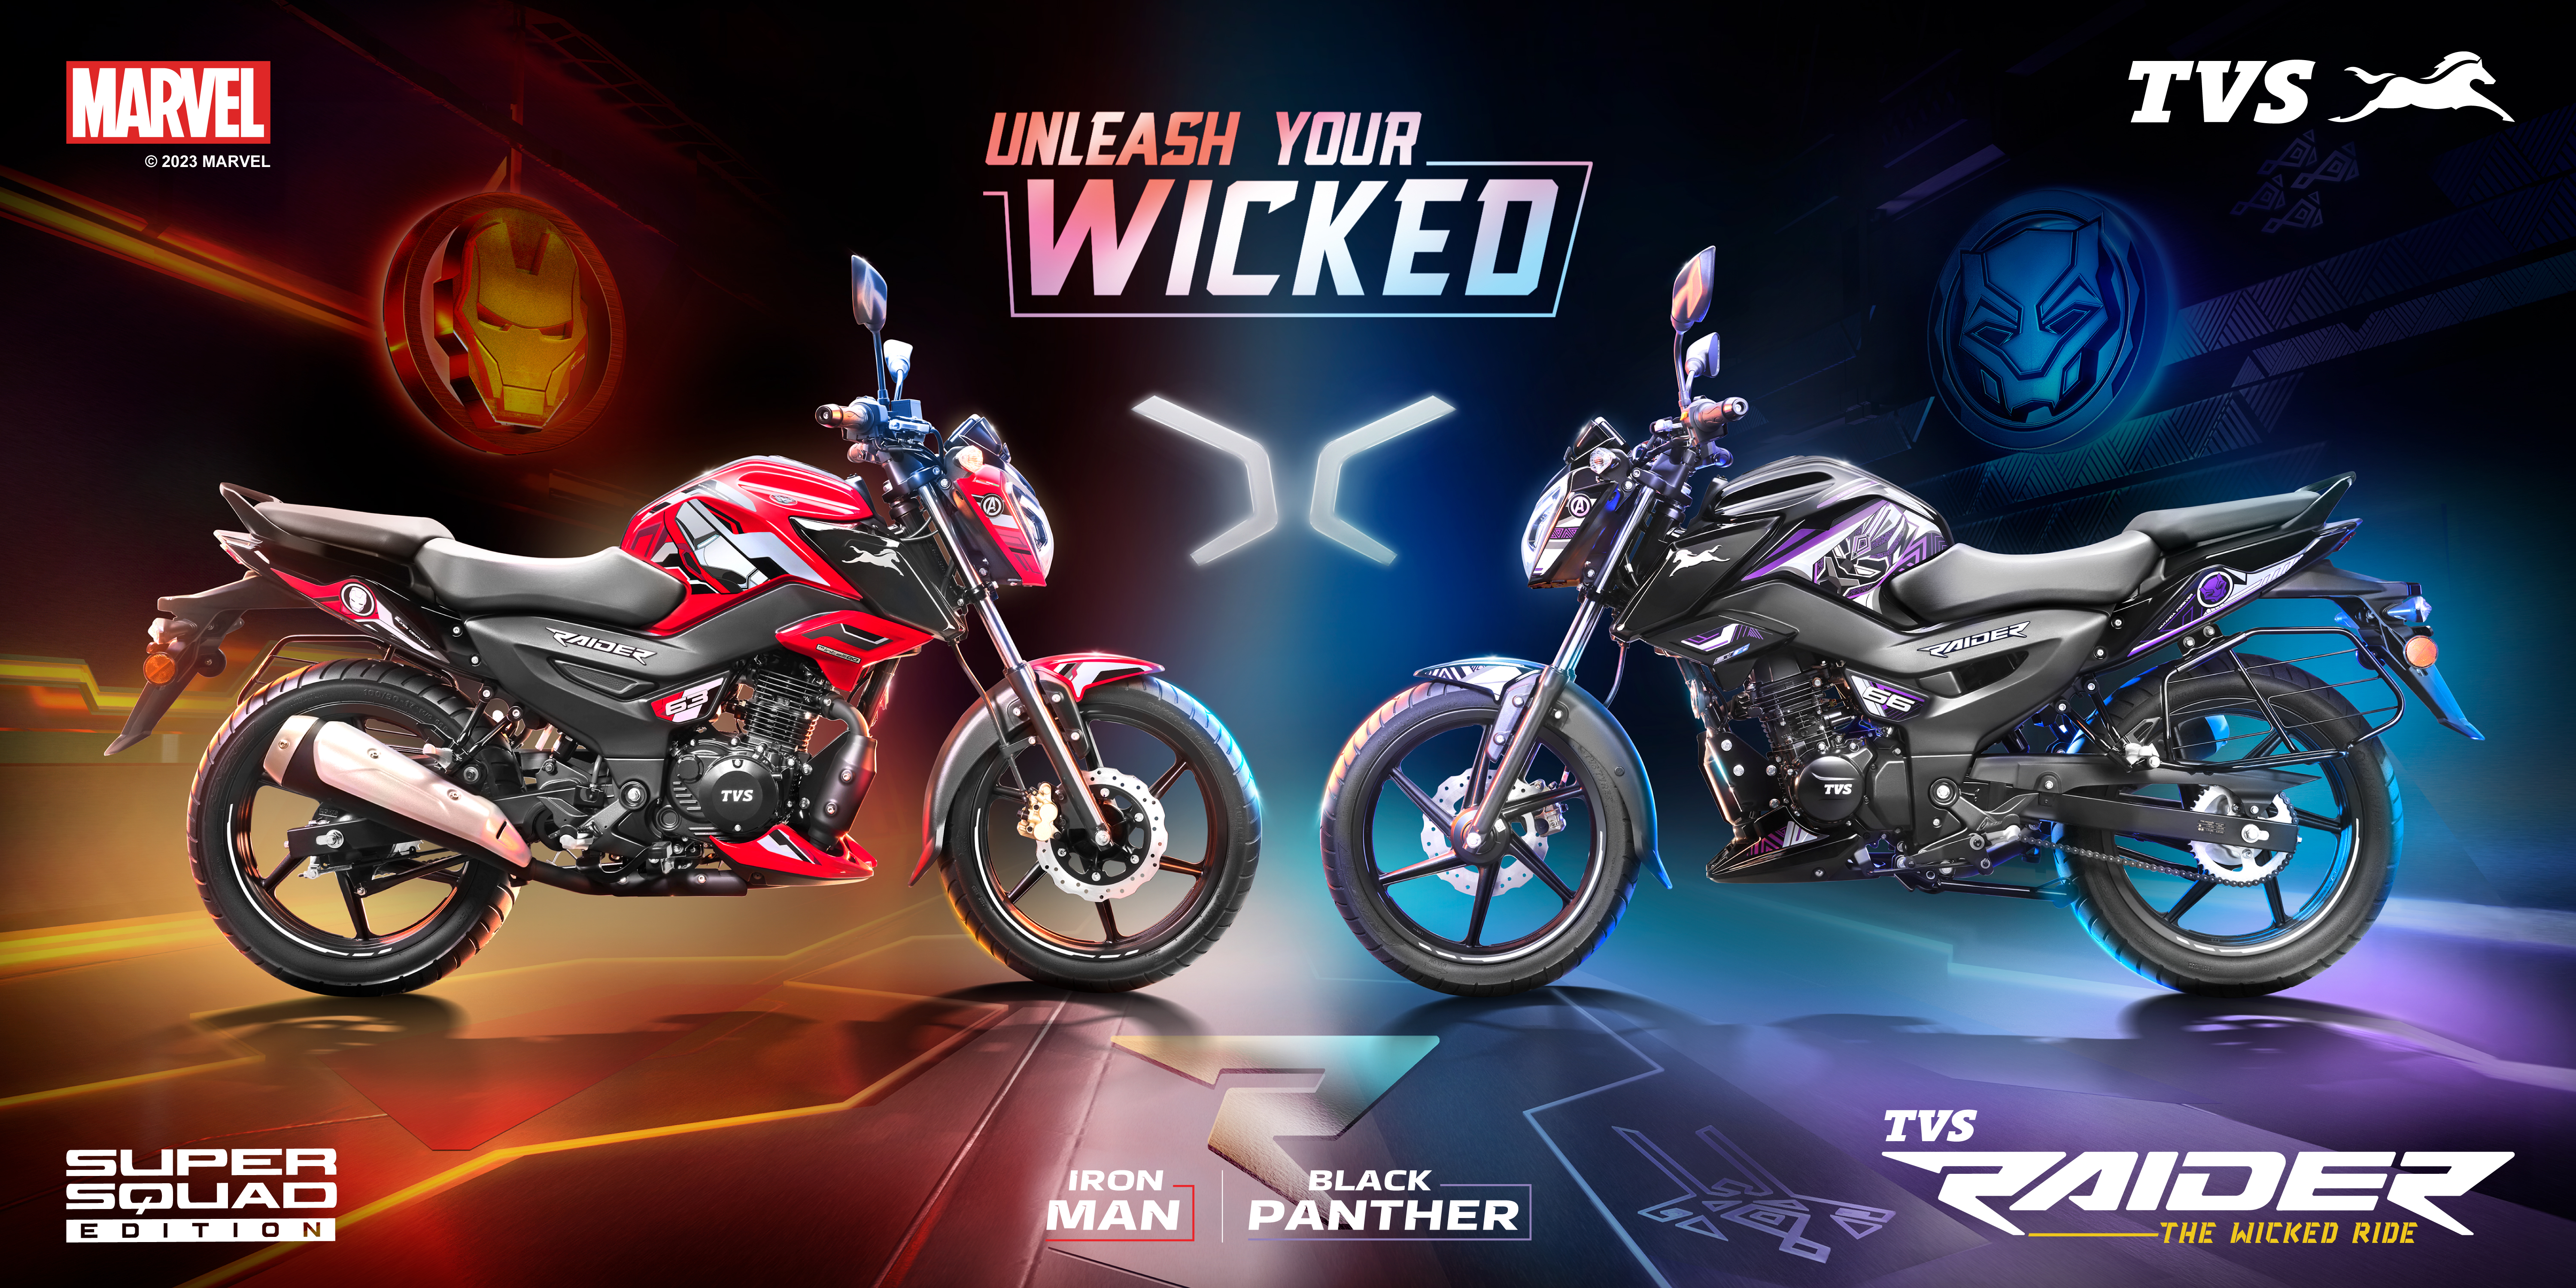 TVS Motor Company launches TVS Raider Super Squad Edition inspired by the iconic Marvel Super Heroes